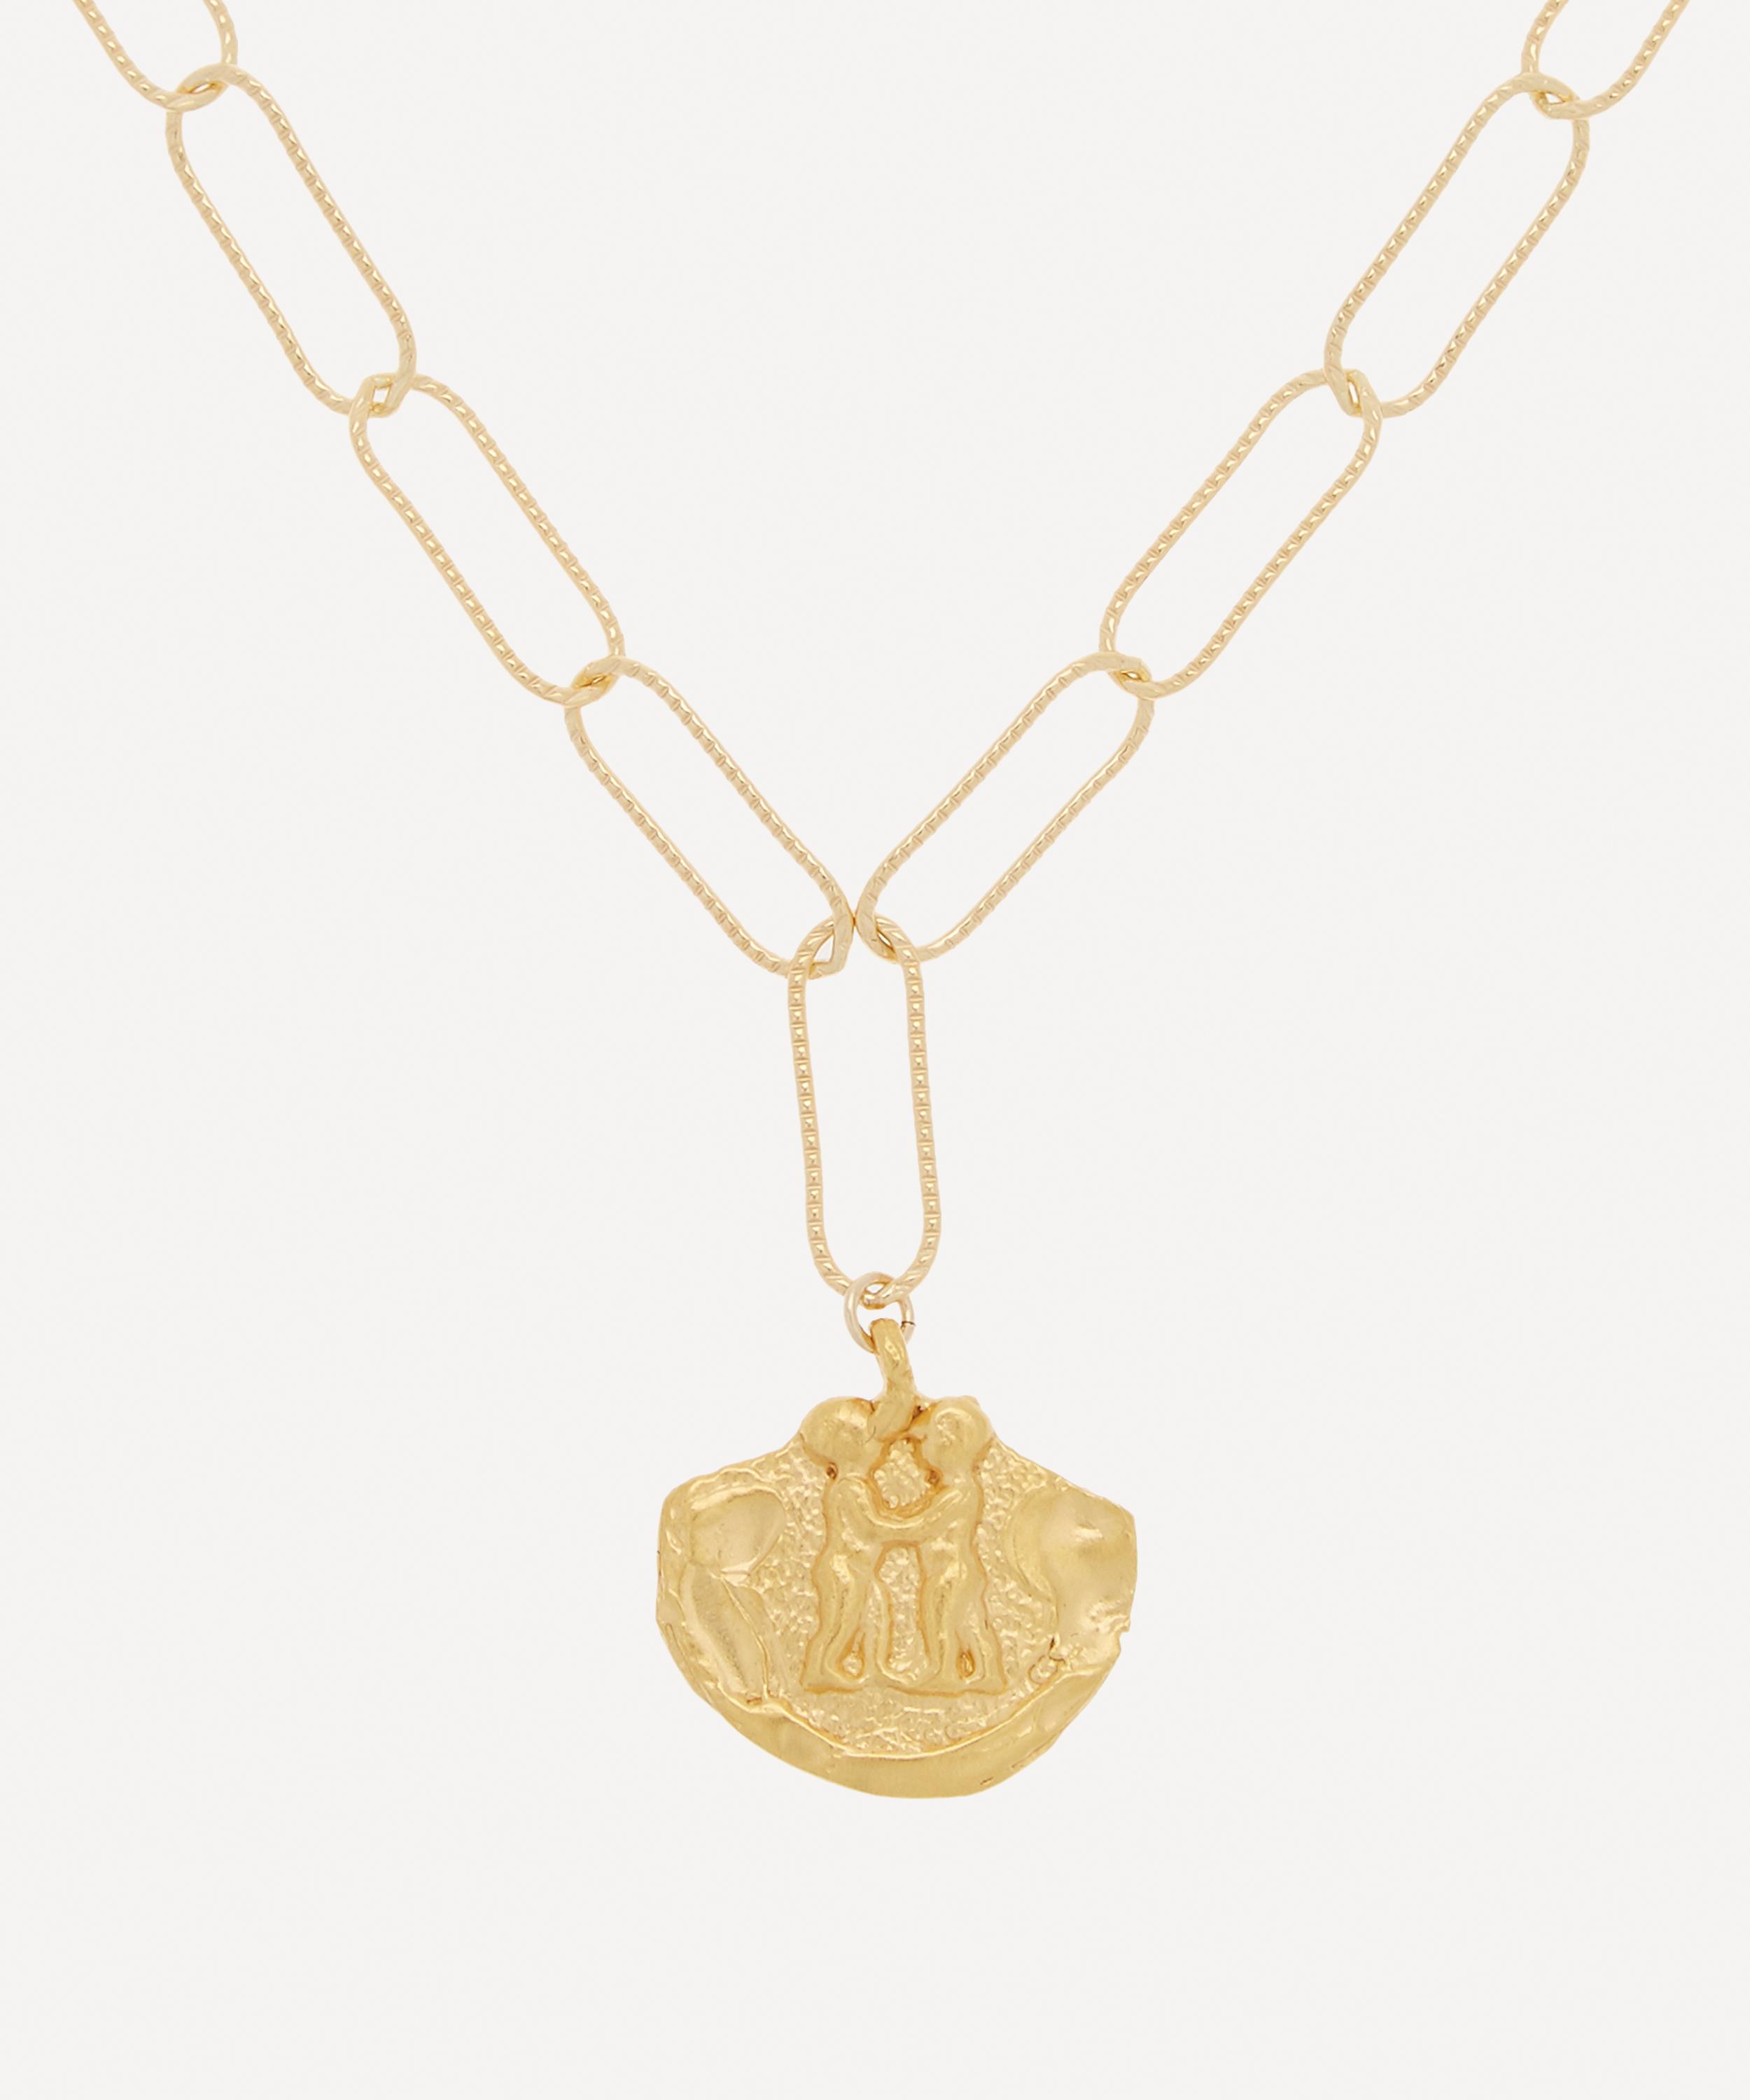 ALIGHIERI GOLD-PLATED PAOLA AND FRANCESCA NECKLACE,000622510